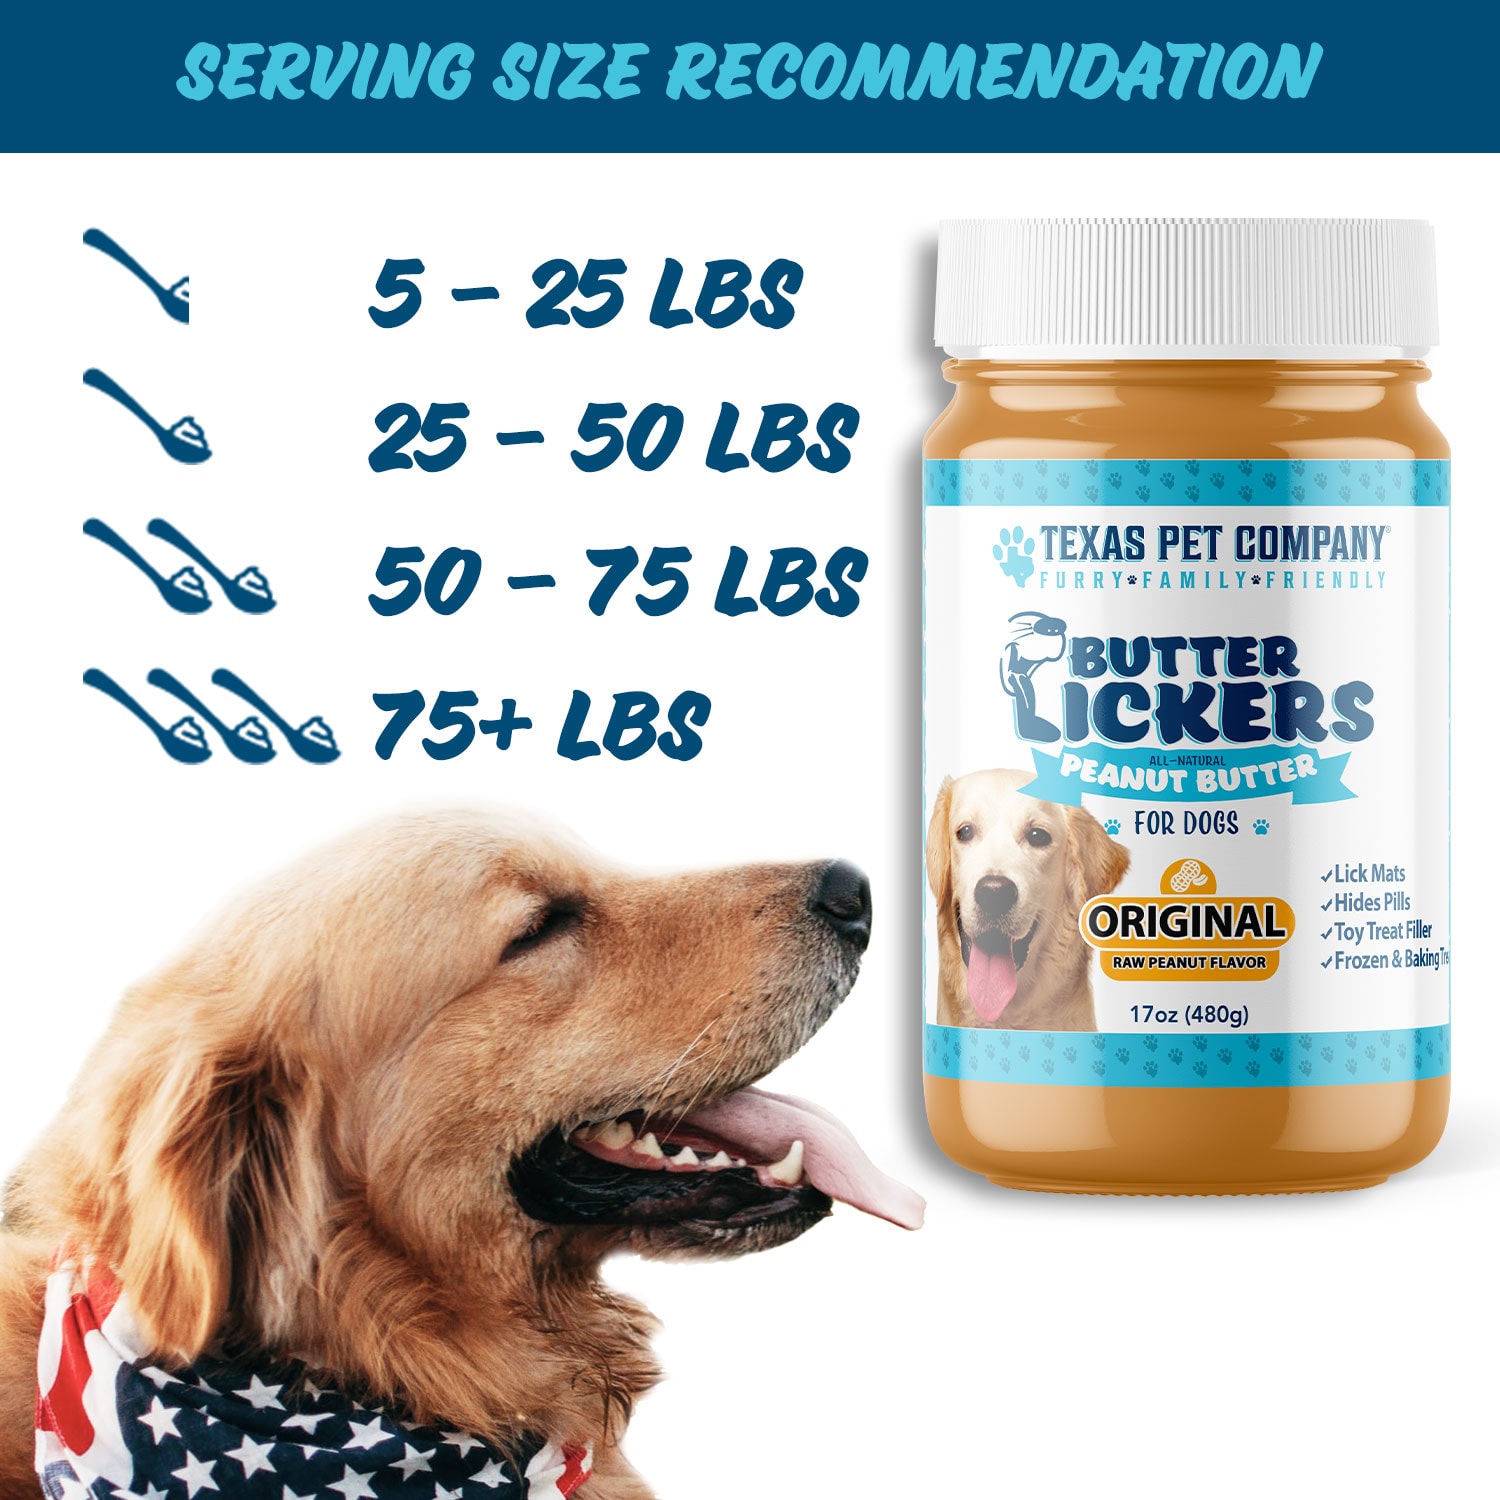 https://texaspetcompany.com/wp-content/uploads/2022/05/Butter-Lickers-Original-Dog-Peanut-Butter-For-Dogs-Serving-Size.jpg